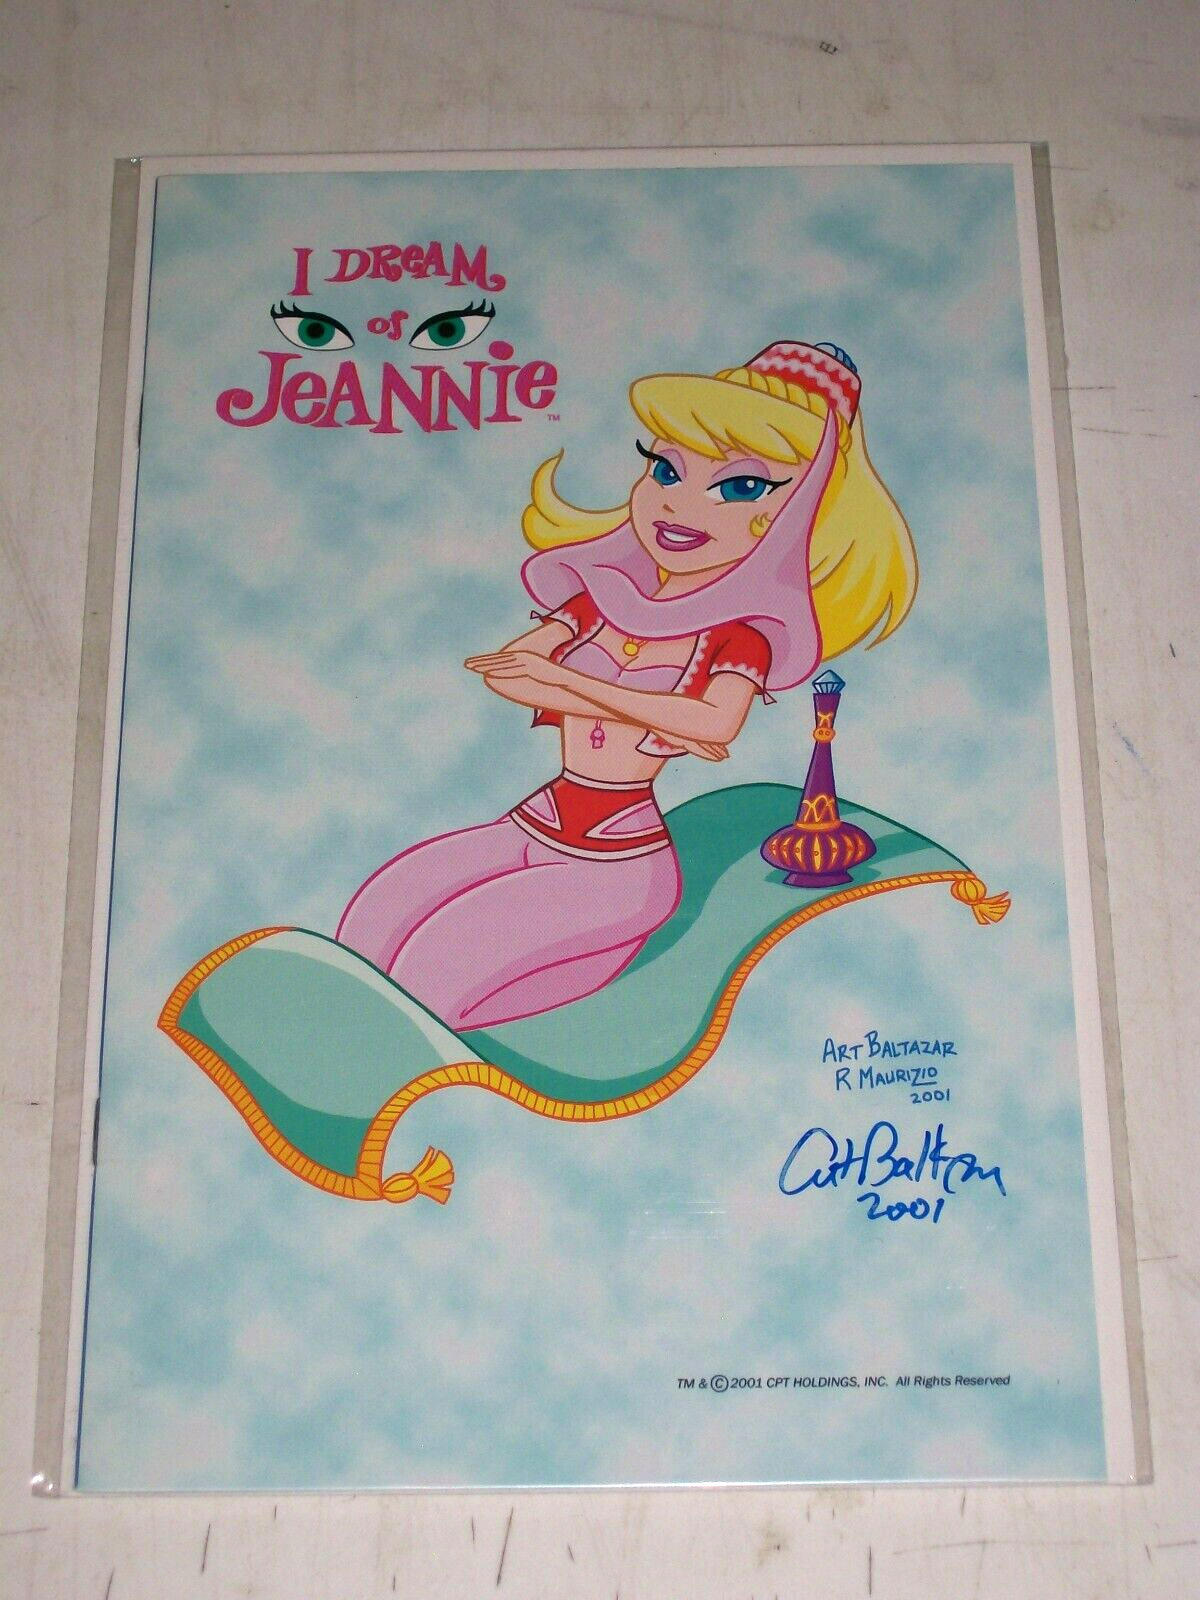 I Dream of Jeannie Preview #1 VF/NM Airwave 2001 Signed by Art Baltazar